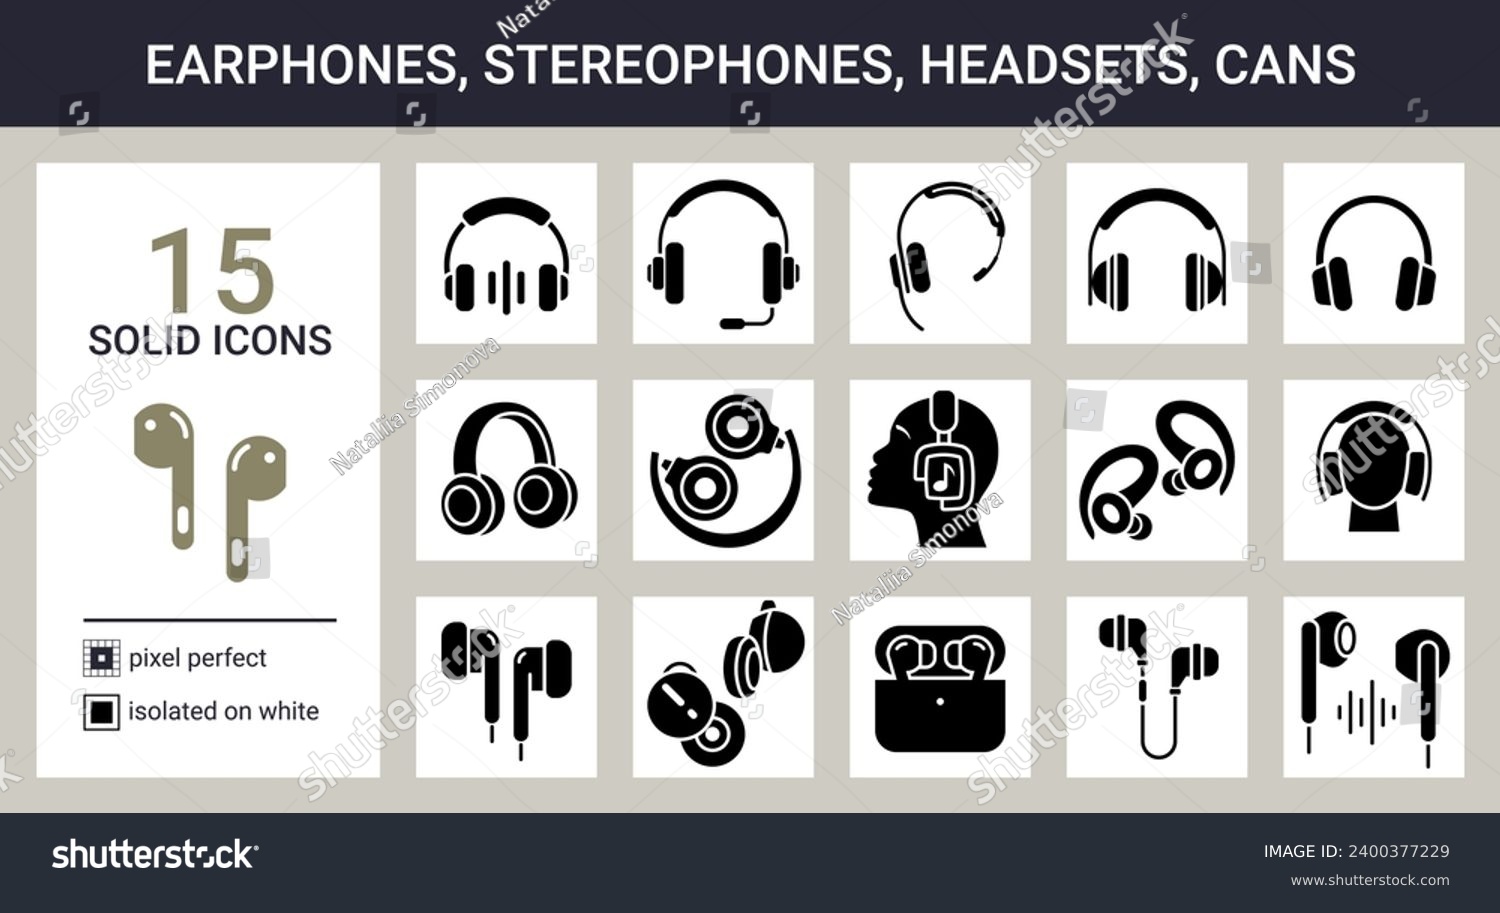 SVG of Big set of solid icons on white background. Earphones, in-ear headphones, stereo phones, headsets, cans etc. Pixel perfect. svg